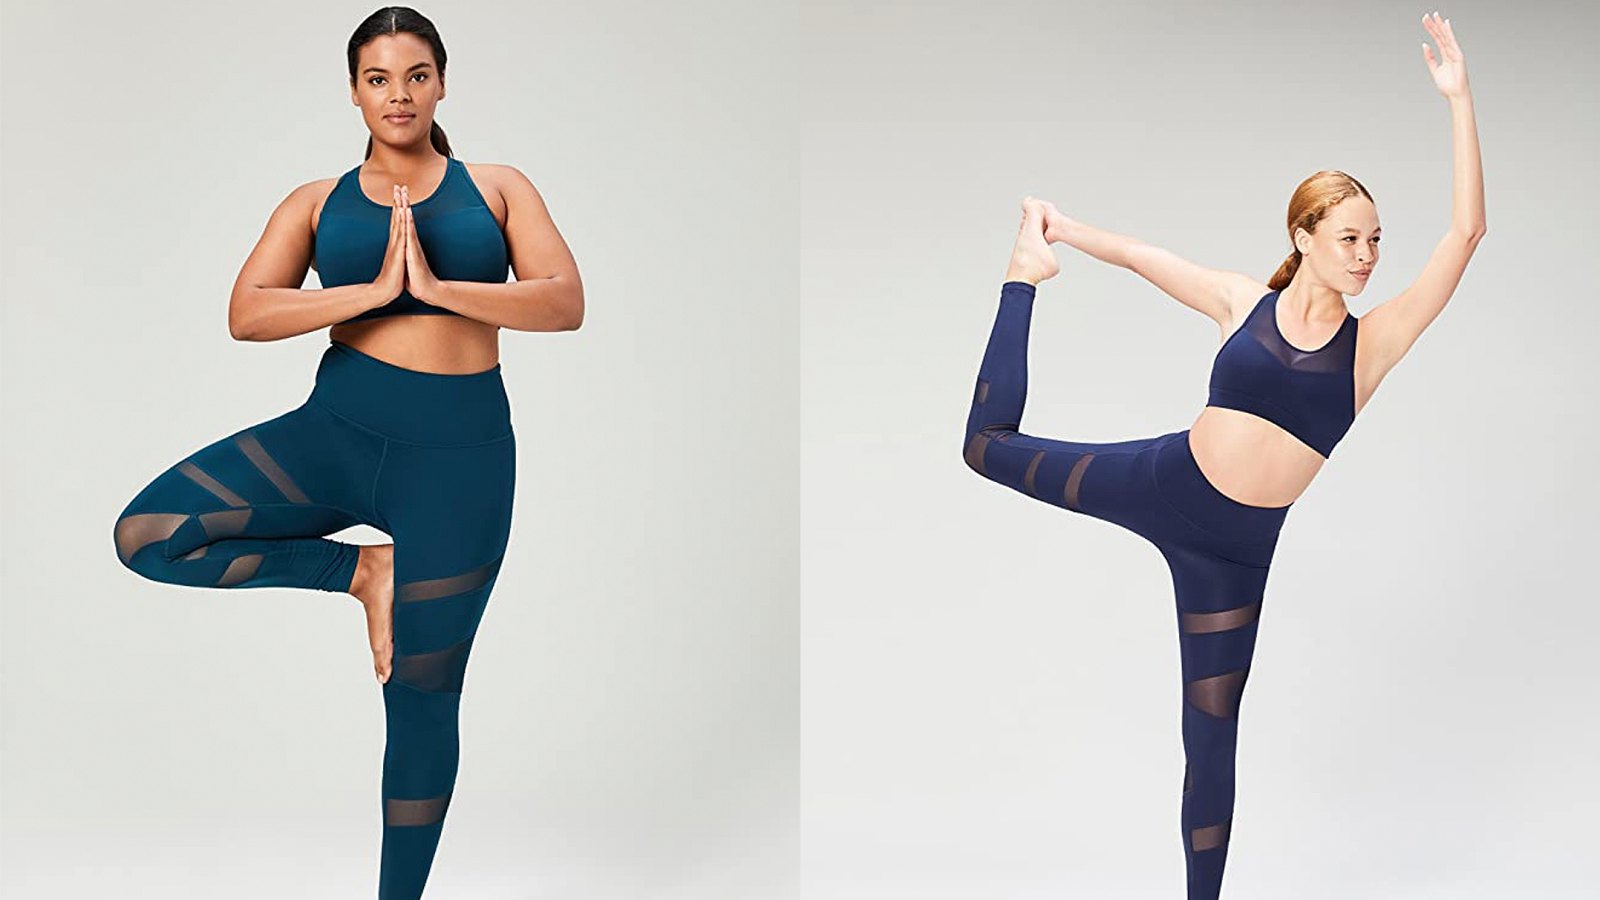 Core 10 Leggings Are an Affordable Alternative to Name Brands